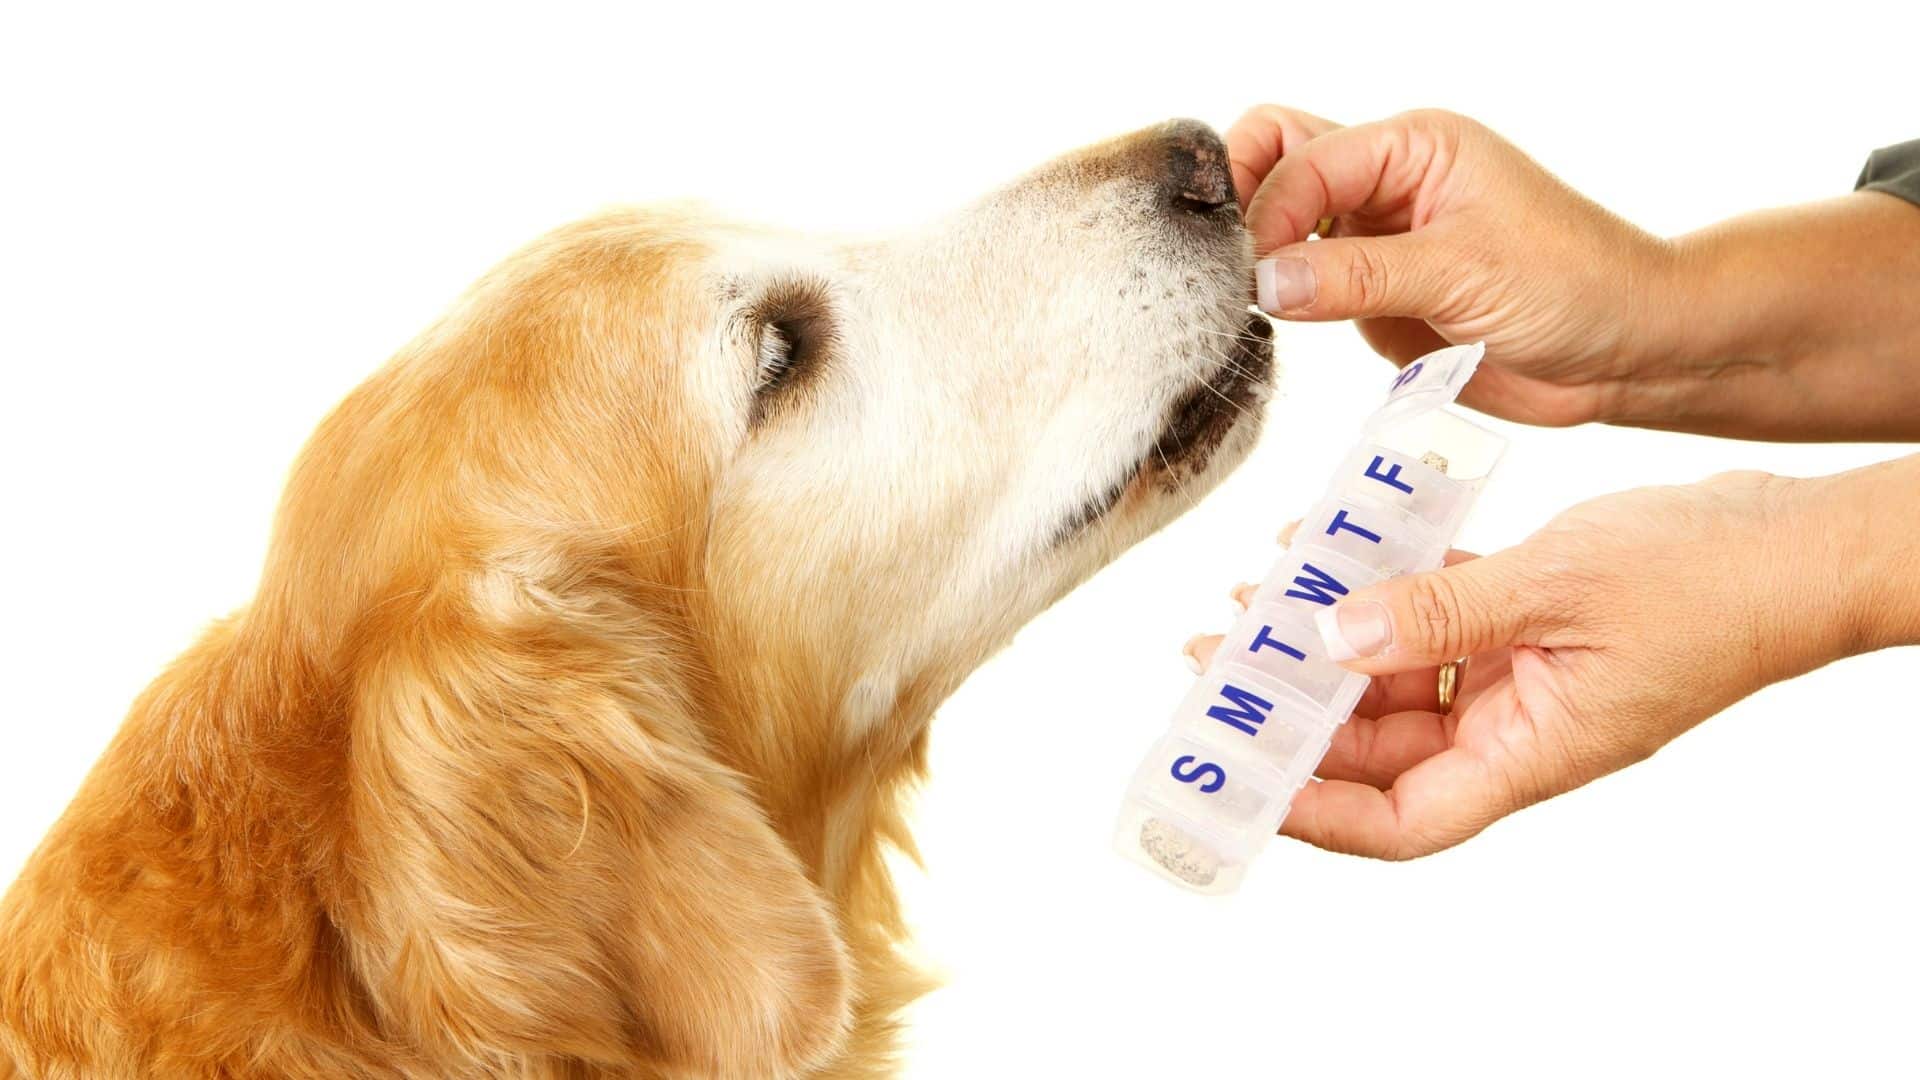 Amoxicillin for Dogs: Uses, Dosage and Side Effects